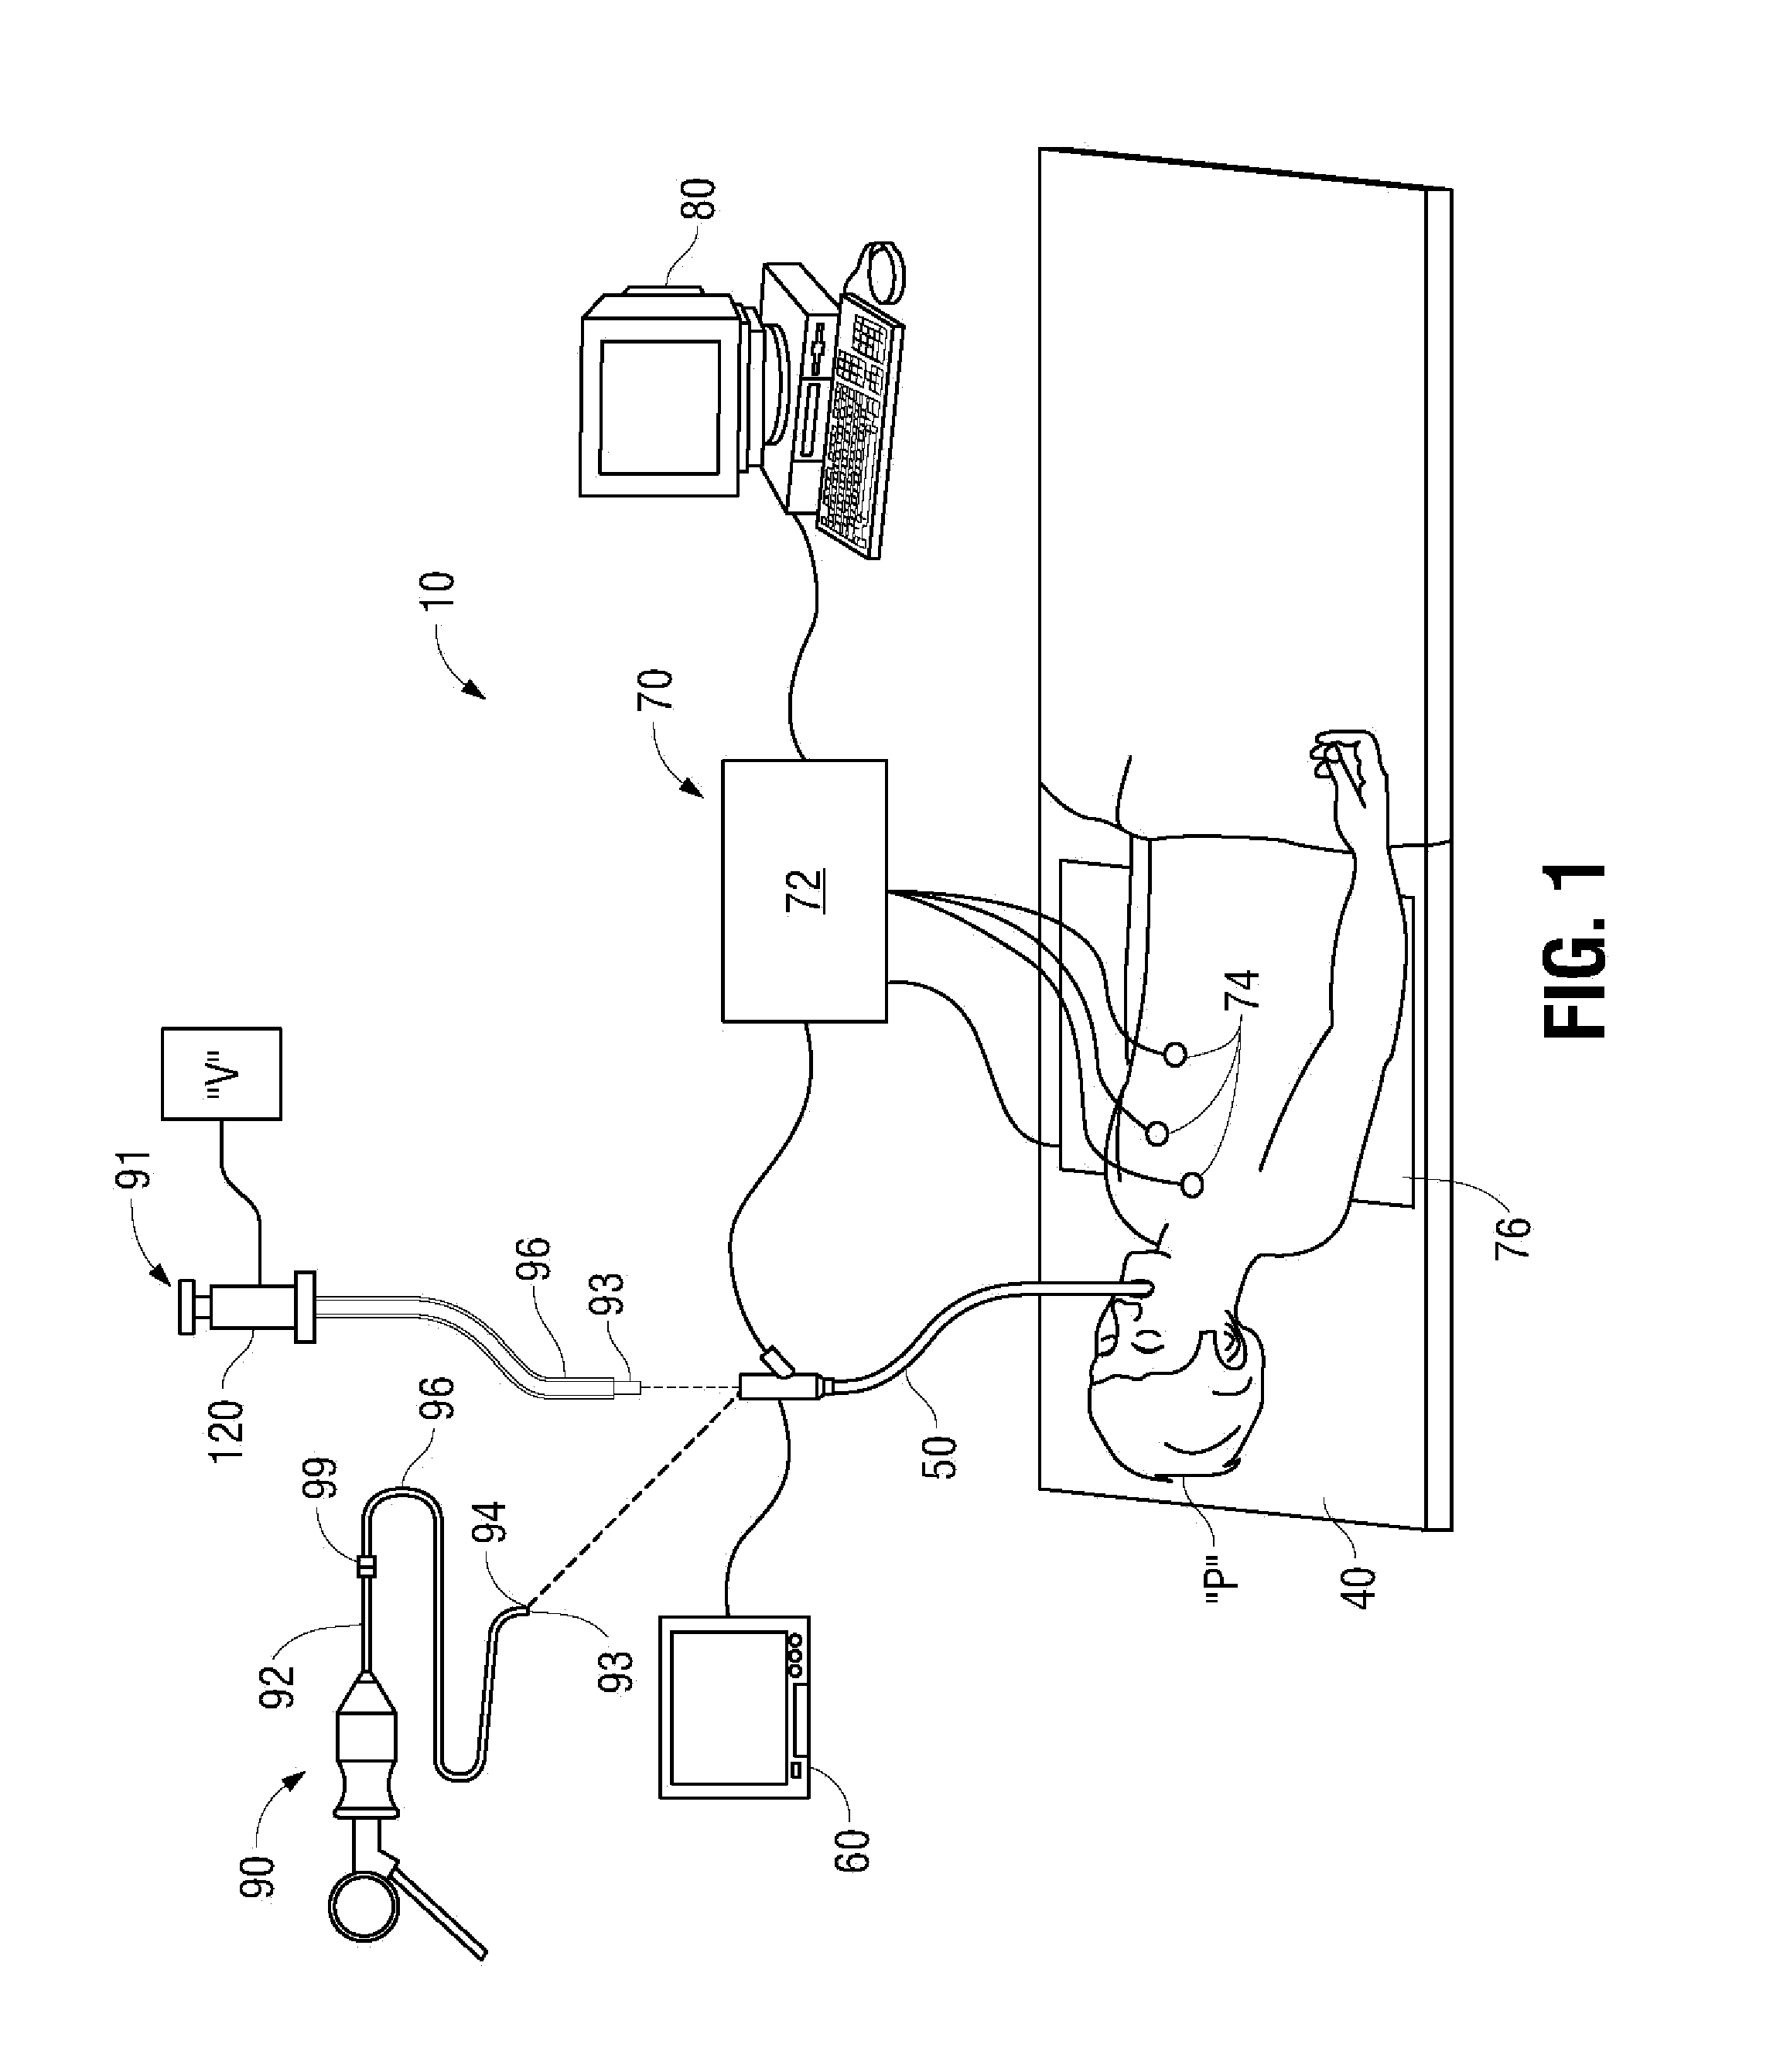 Devices, systems, and methods for navigating a biopsy tool to a target location and obtaining a tissue sample using the same